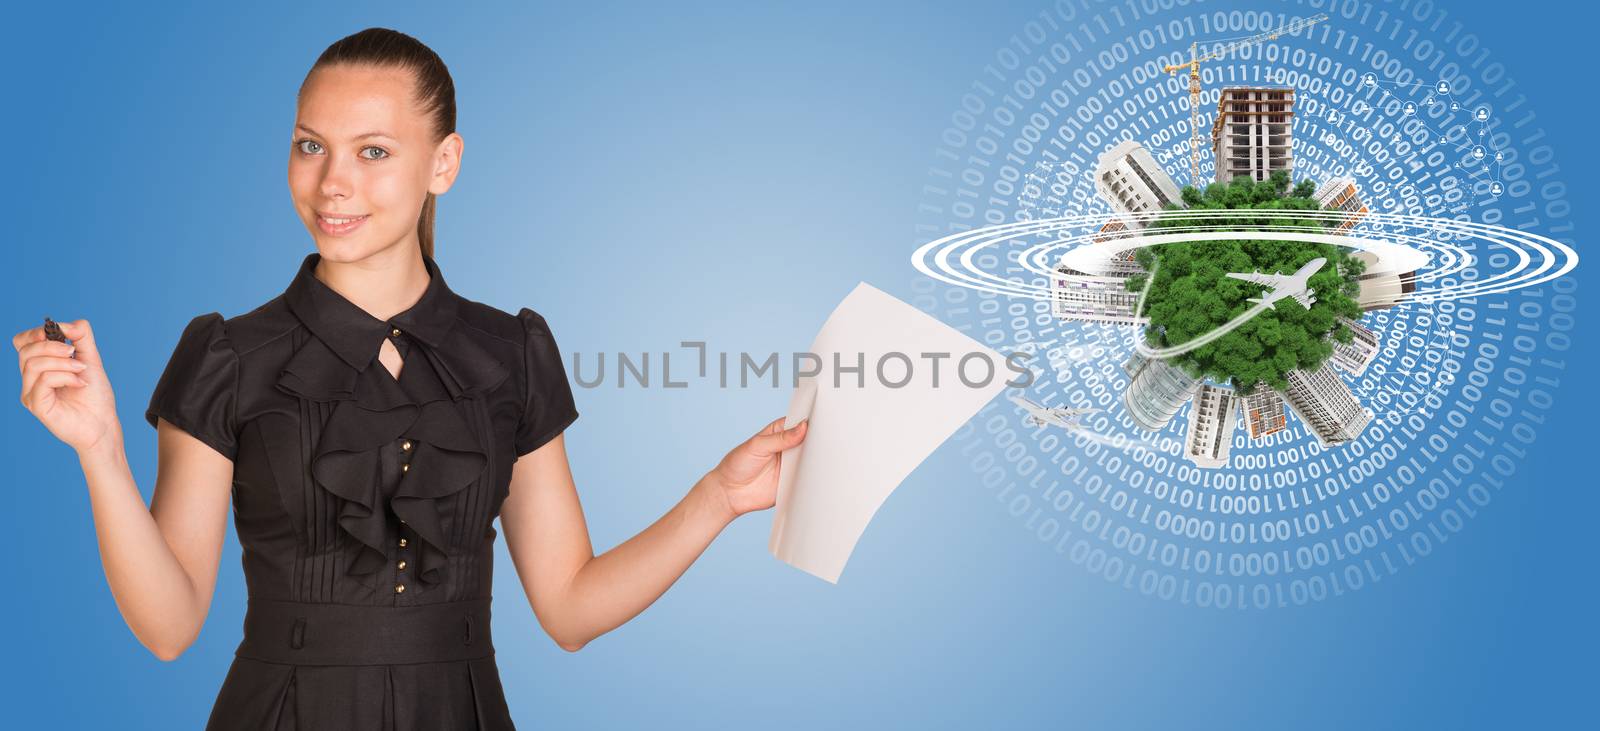 Beautiful businesswoman holding blank paper sheet and felt pen ready to use.  Beside is miniature Earth with trees, industrial and residential buildings, airplane and surrounded by rings., part of them composed of digits